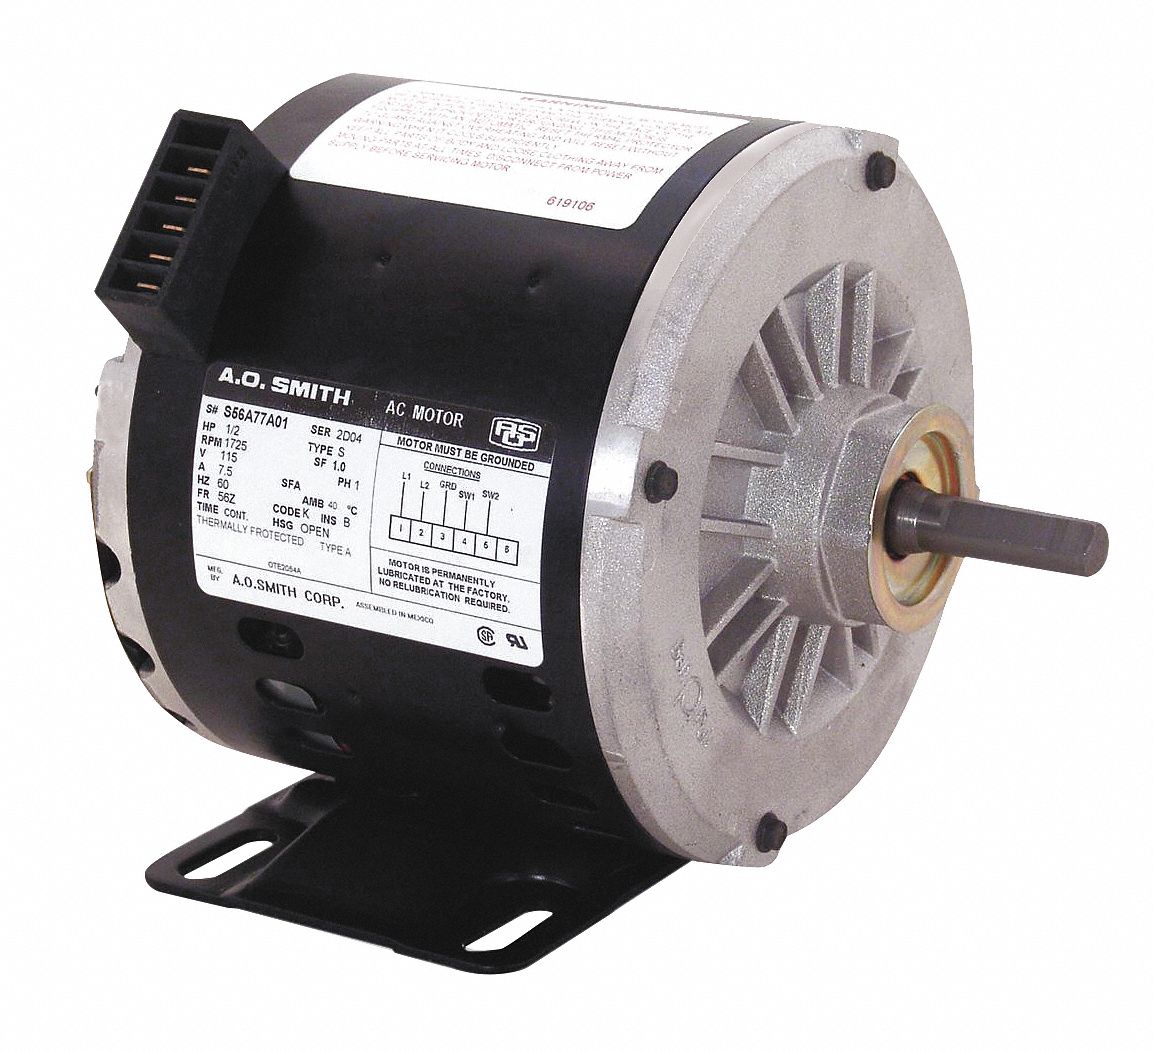 Belt Drive Motor, 1/2 HP, OEM Replacement Brand: Triangle Engineering